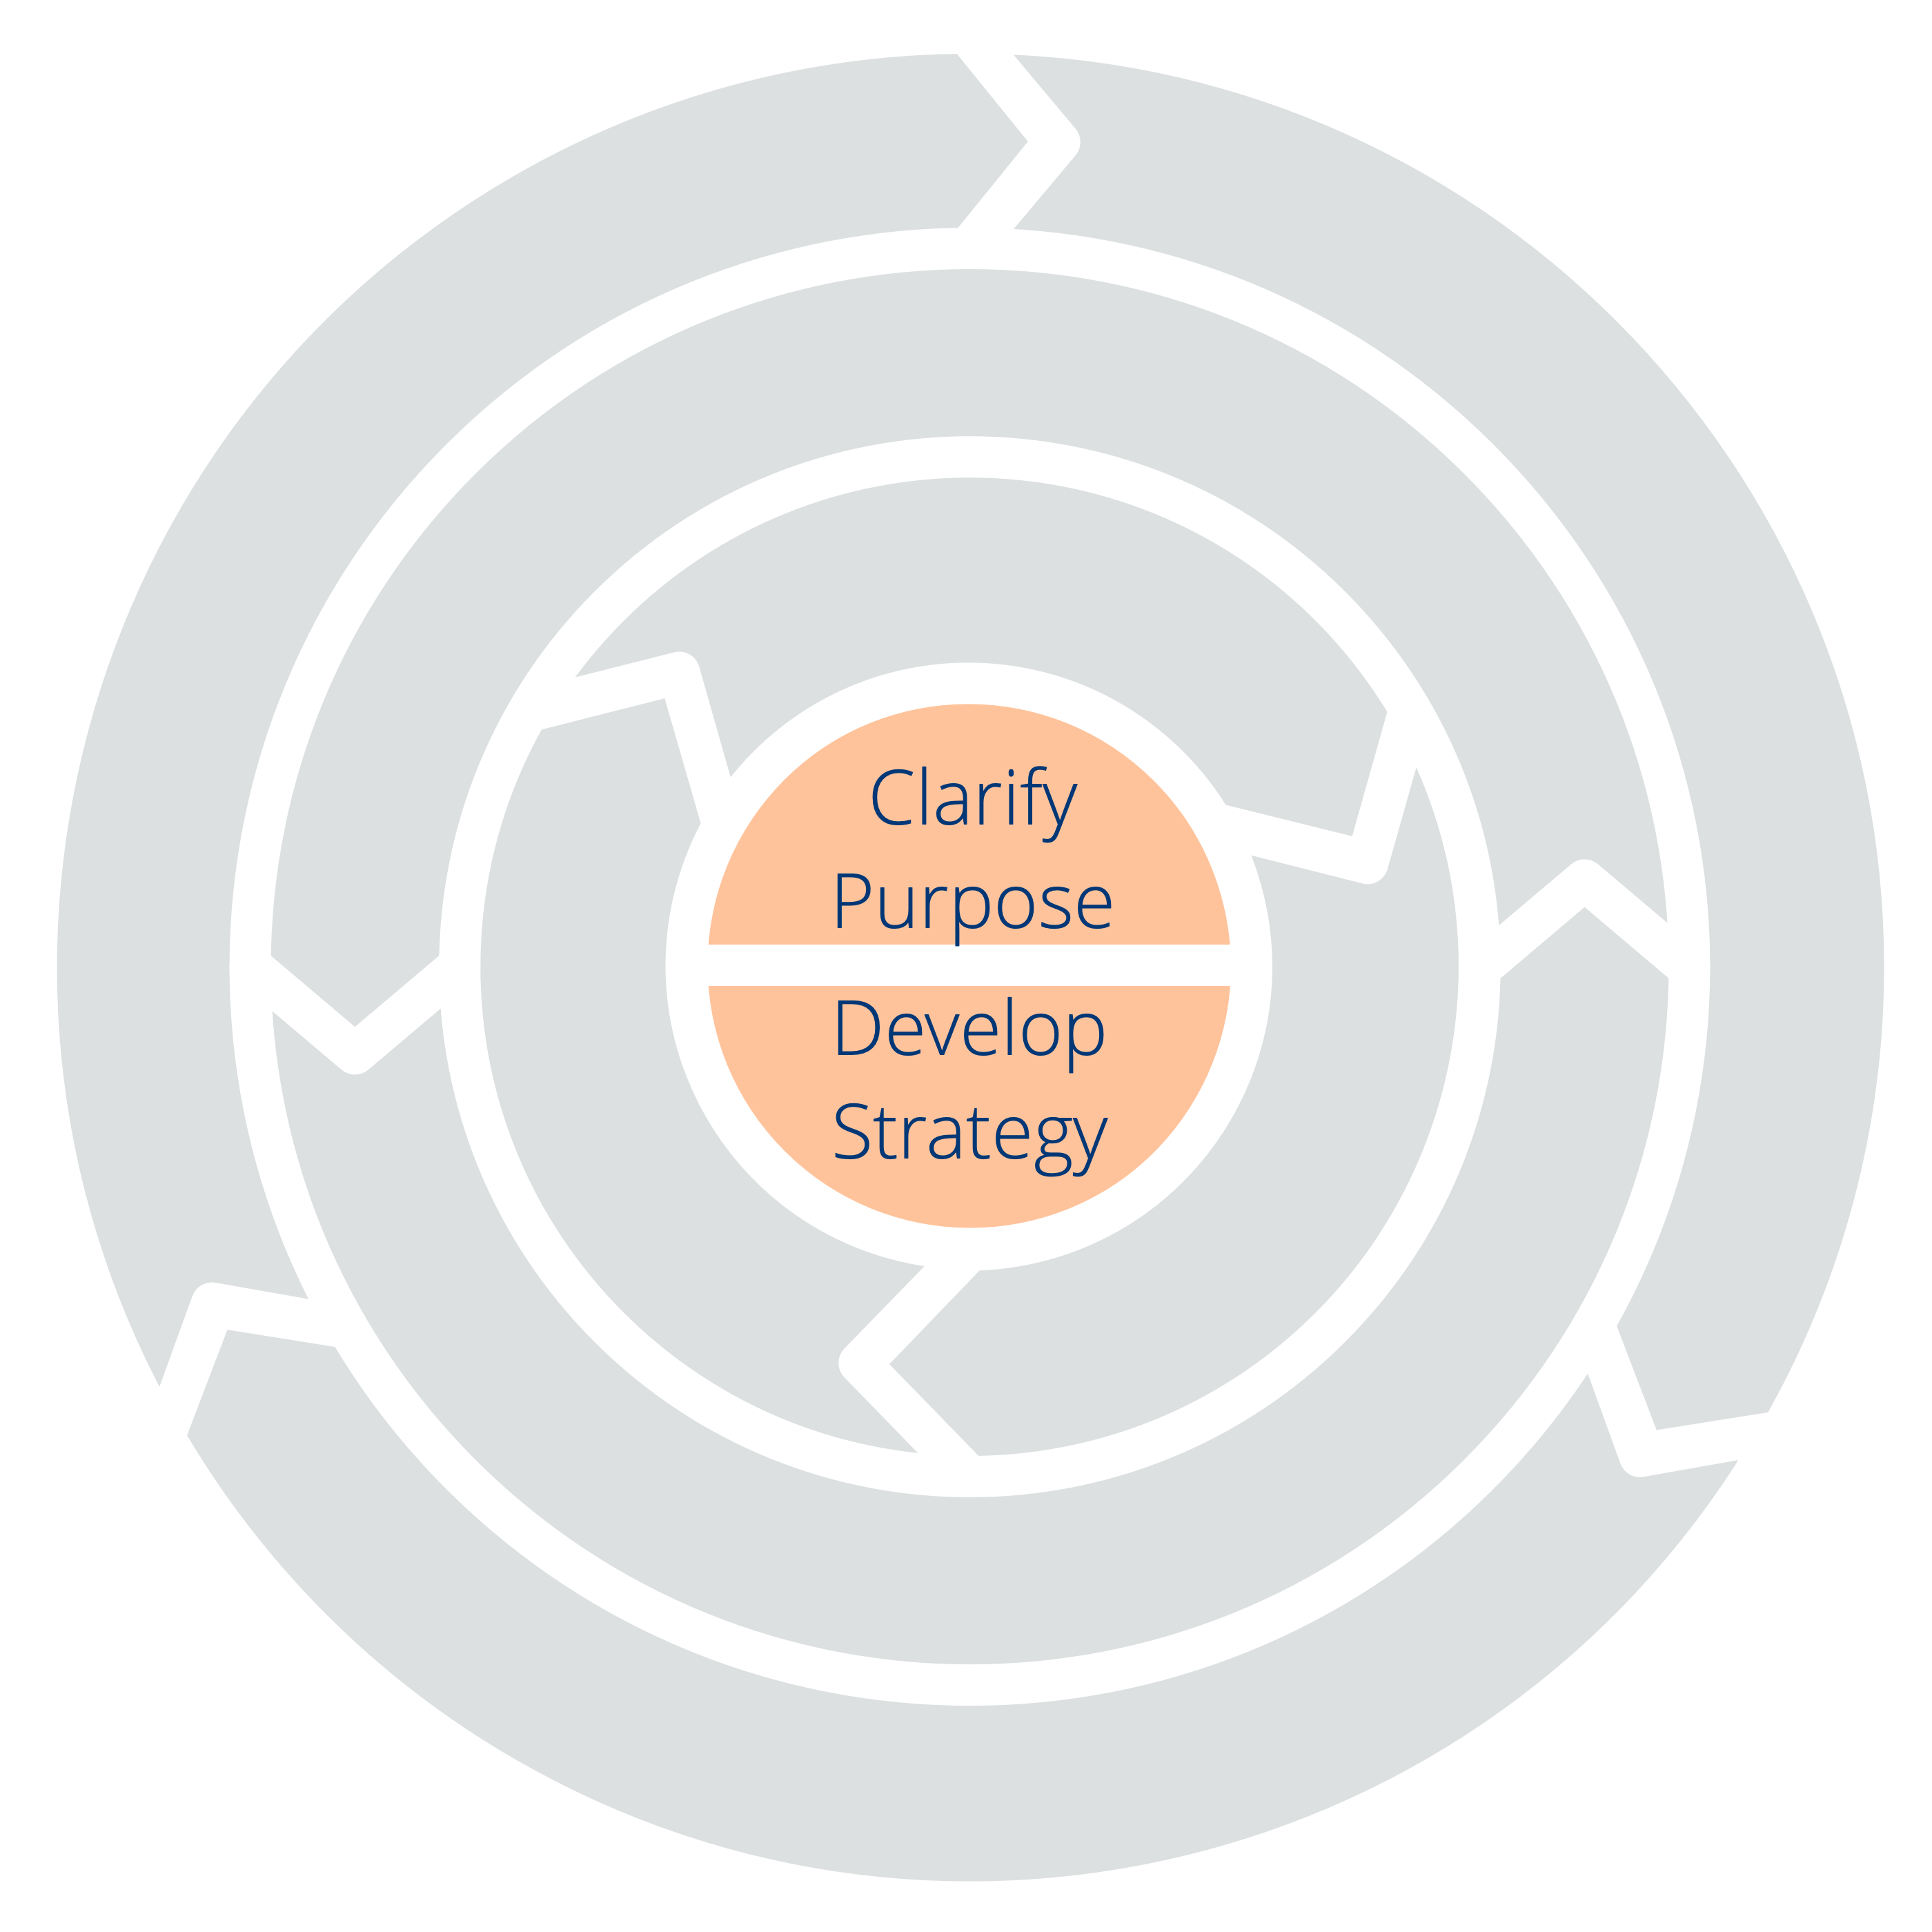 Two Principles for Orientation: Clarify Purpose – Develop Strategy